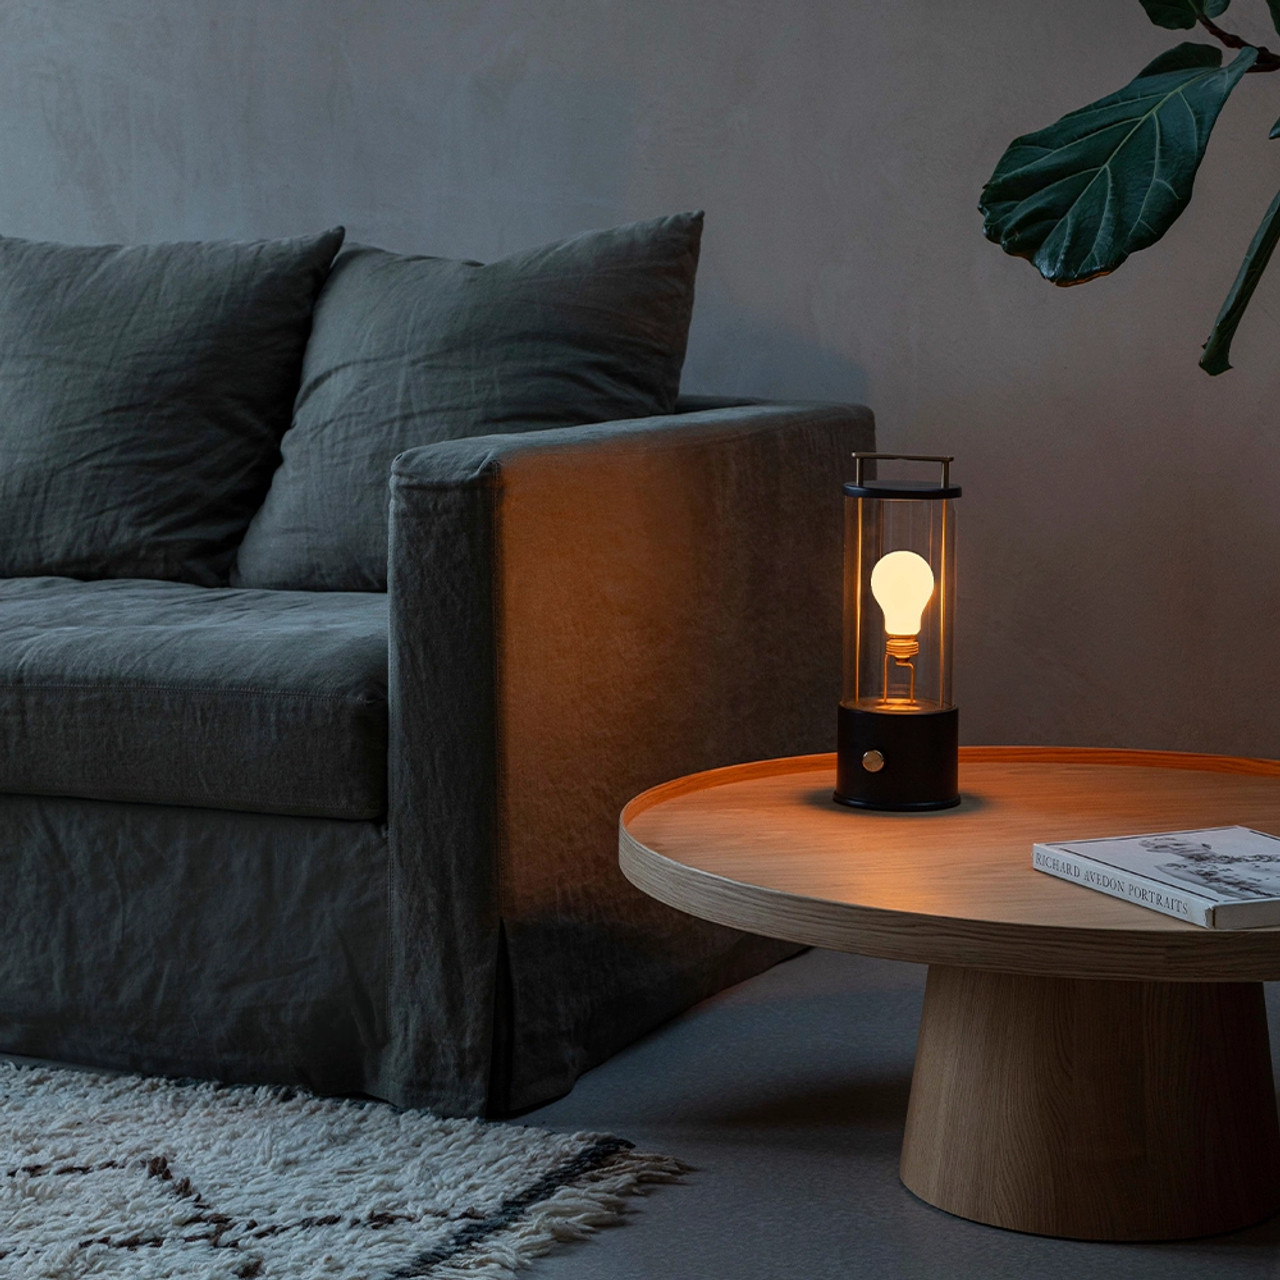 Tala - The Muse Battery table lamp